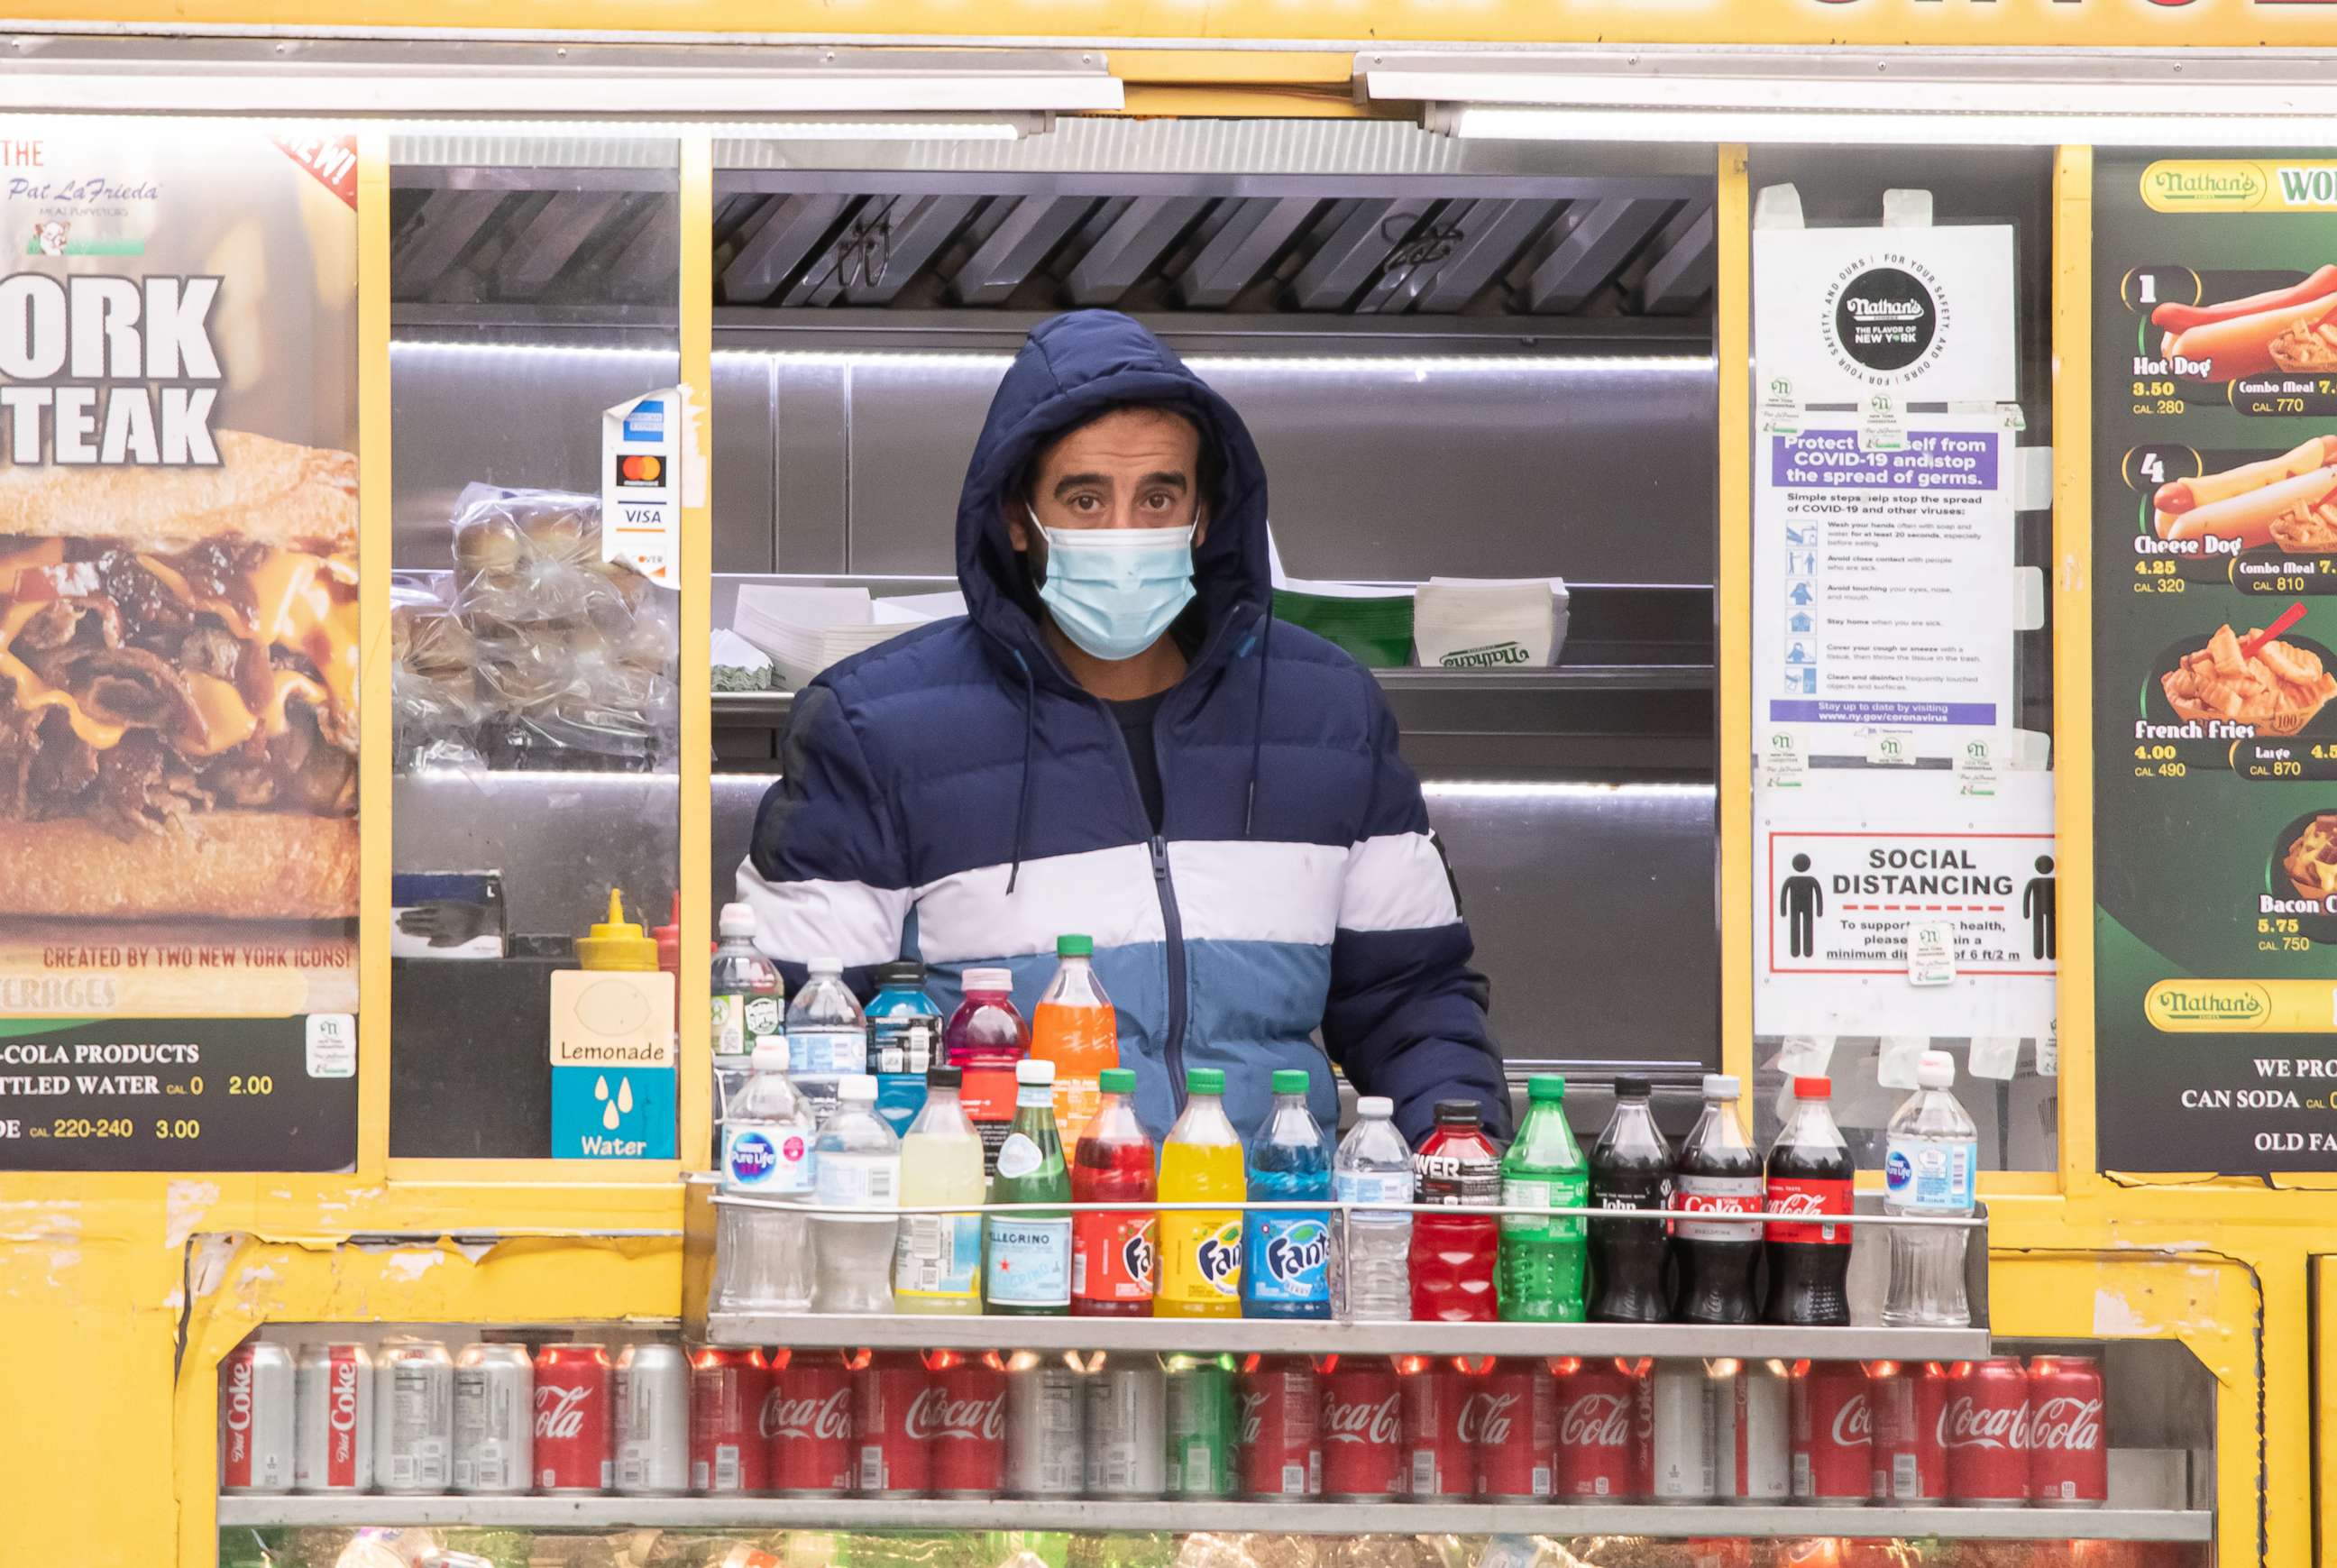 PHOTO: In this Dec. 31, 2020, file photo, a worker wears a face mask inside a food truck in Columbus Circle in New York.